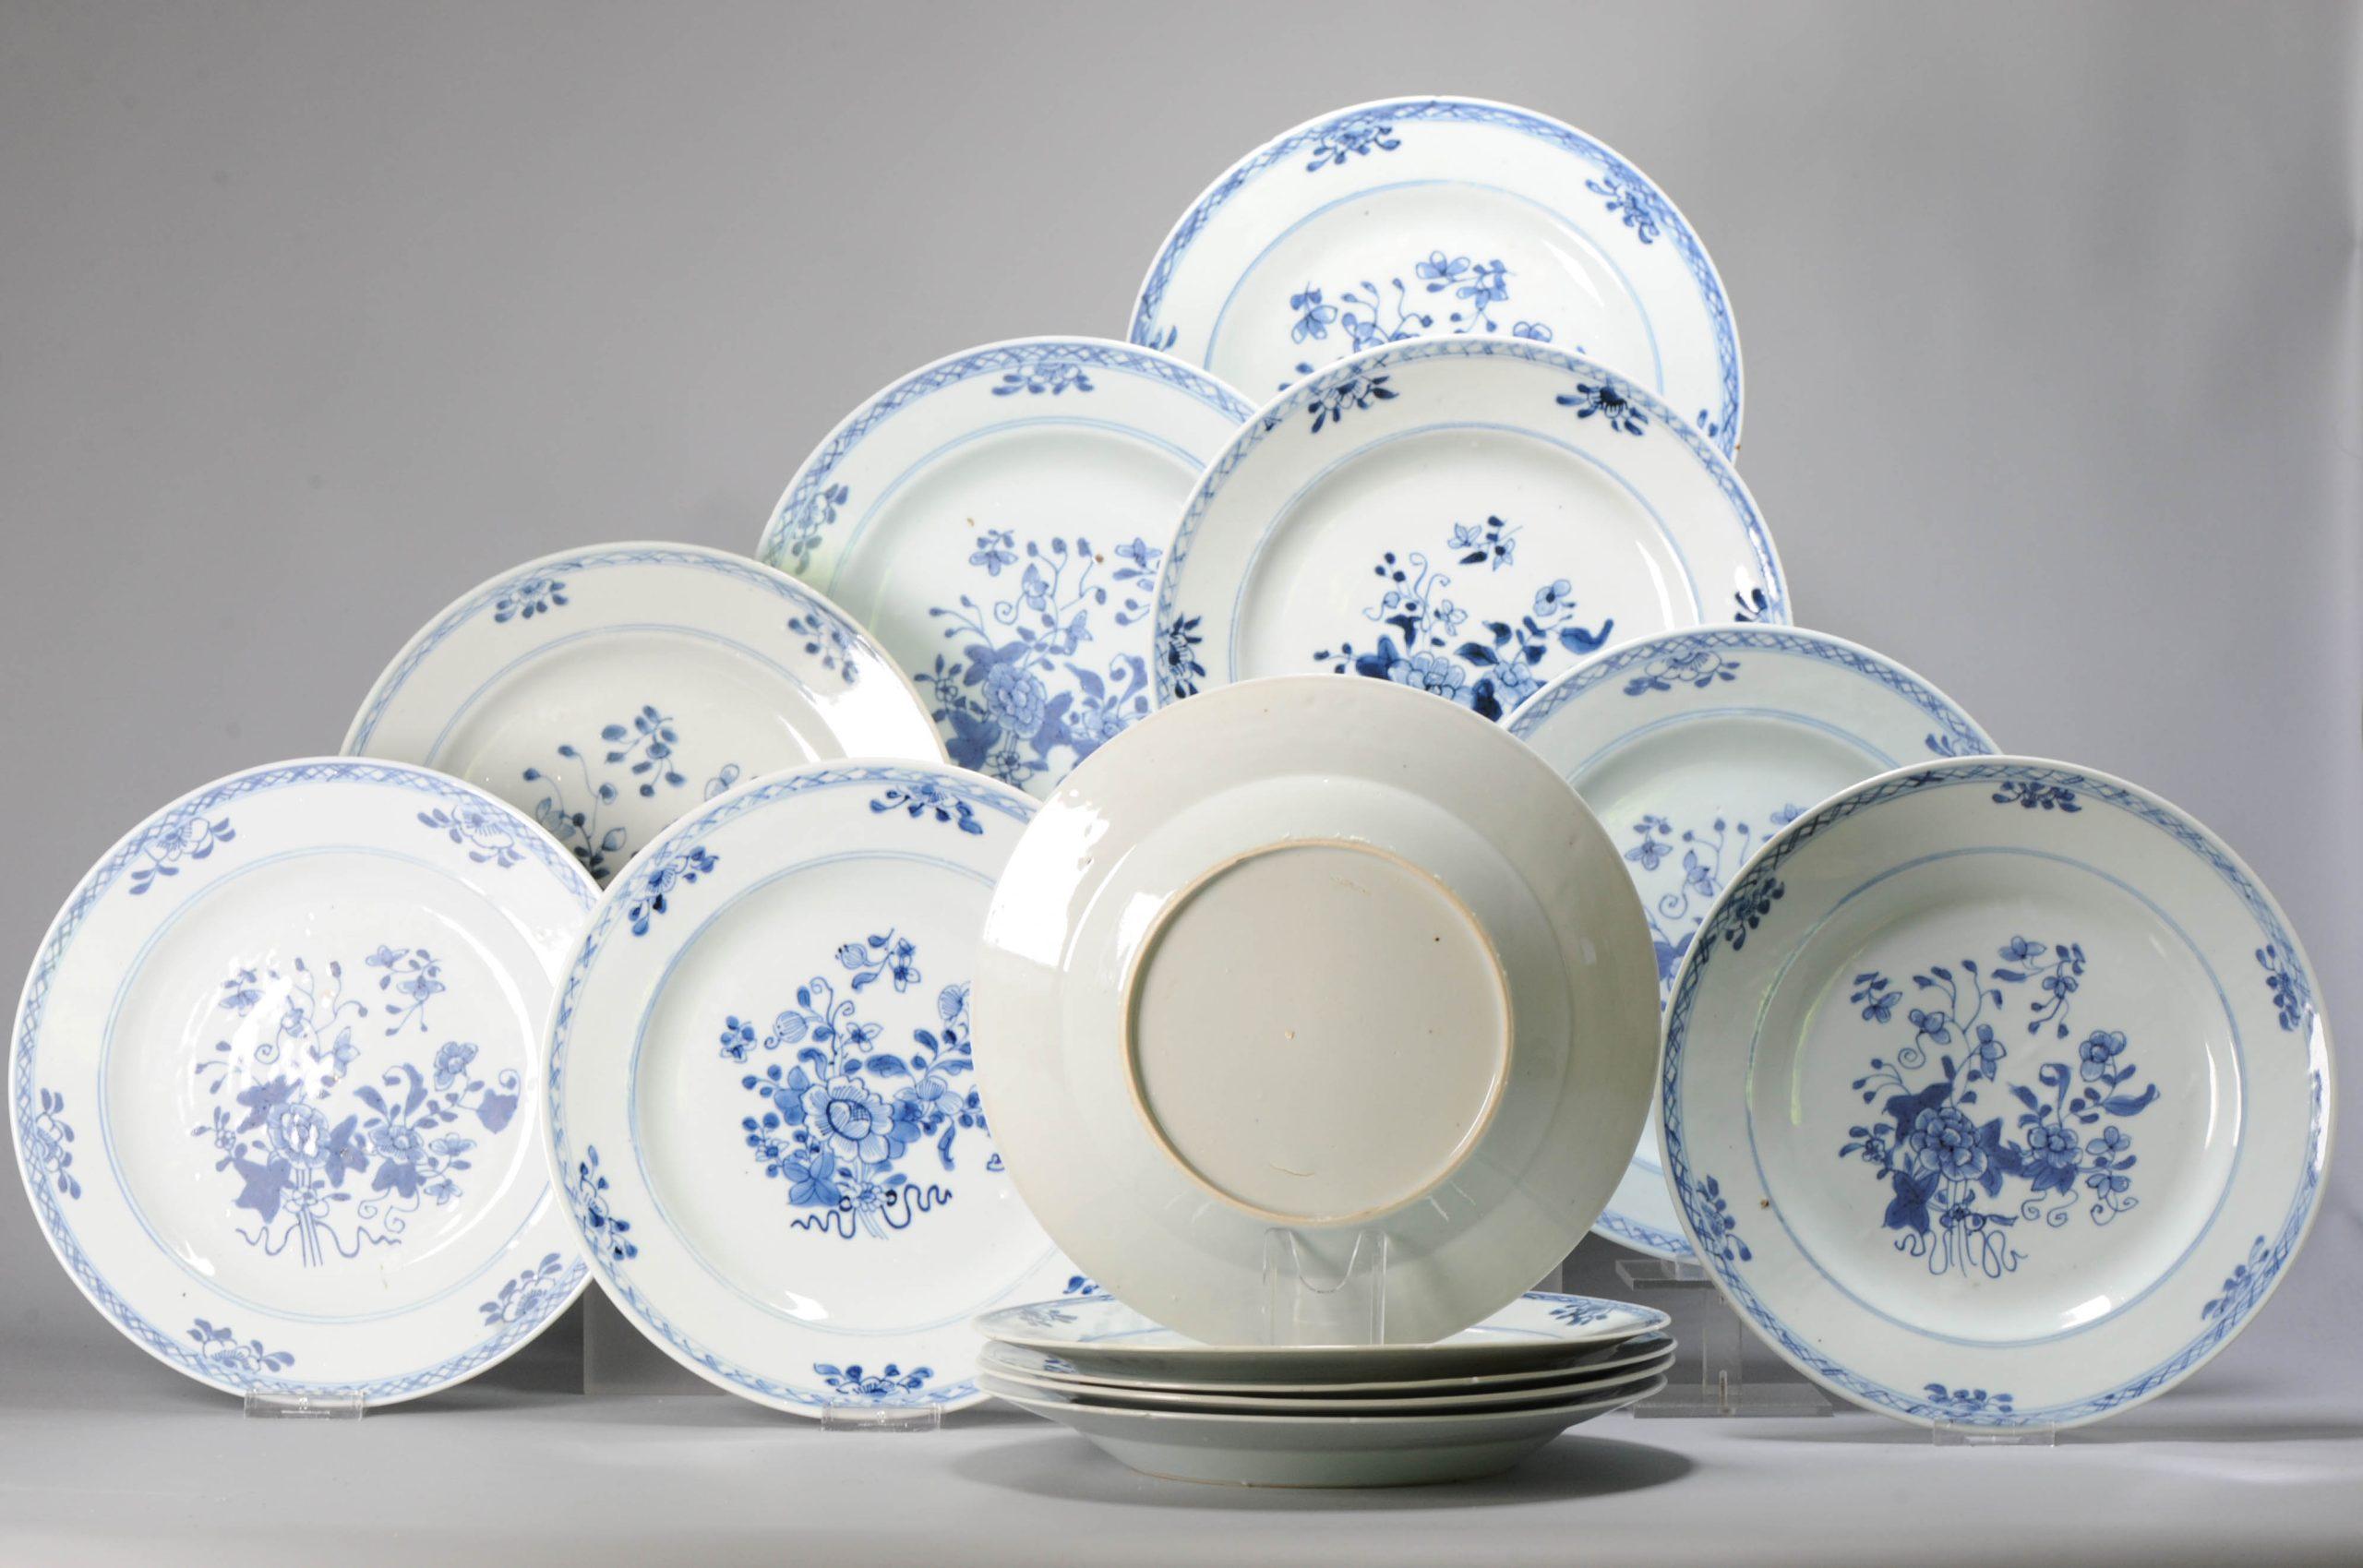 A very nicely decorated Set of 13 dishes in Blue and white with a lovely and high quality floral scene

Additional information:
Material: Porcelain & Pottery
Color: Blue & White
Region of Origin: China
Emperor: Kangxi (1661-1722), Yongzheng